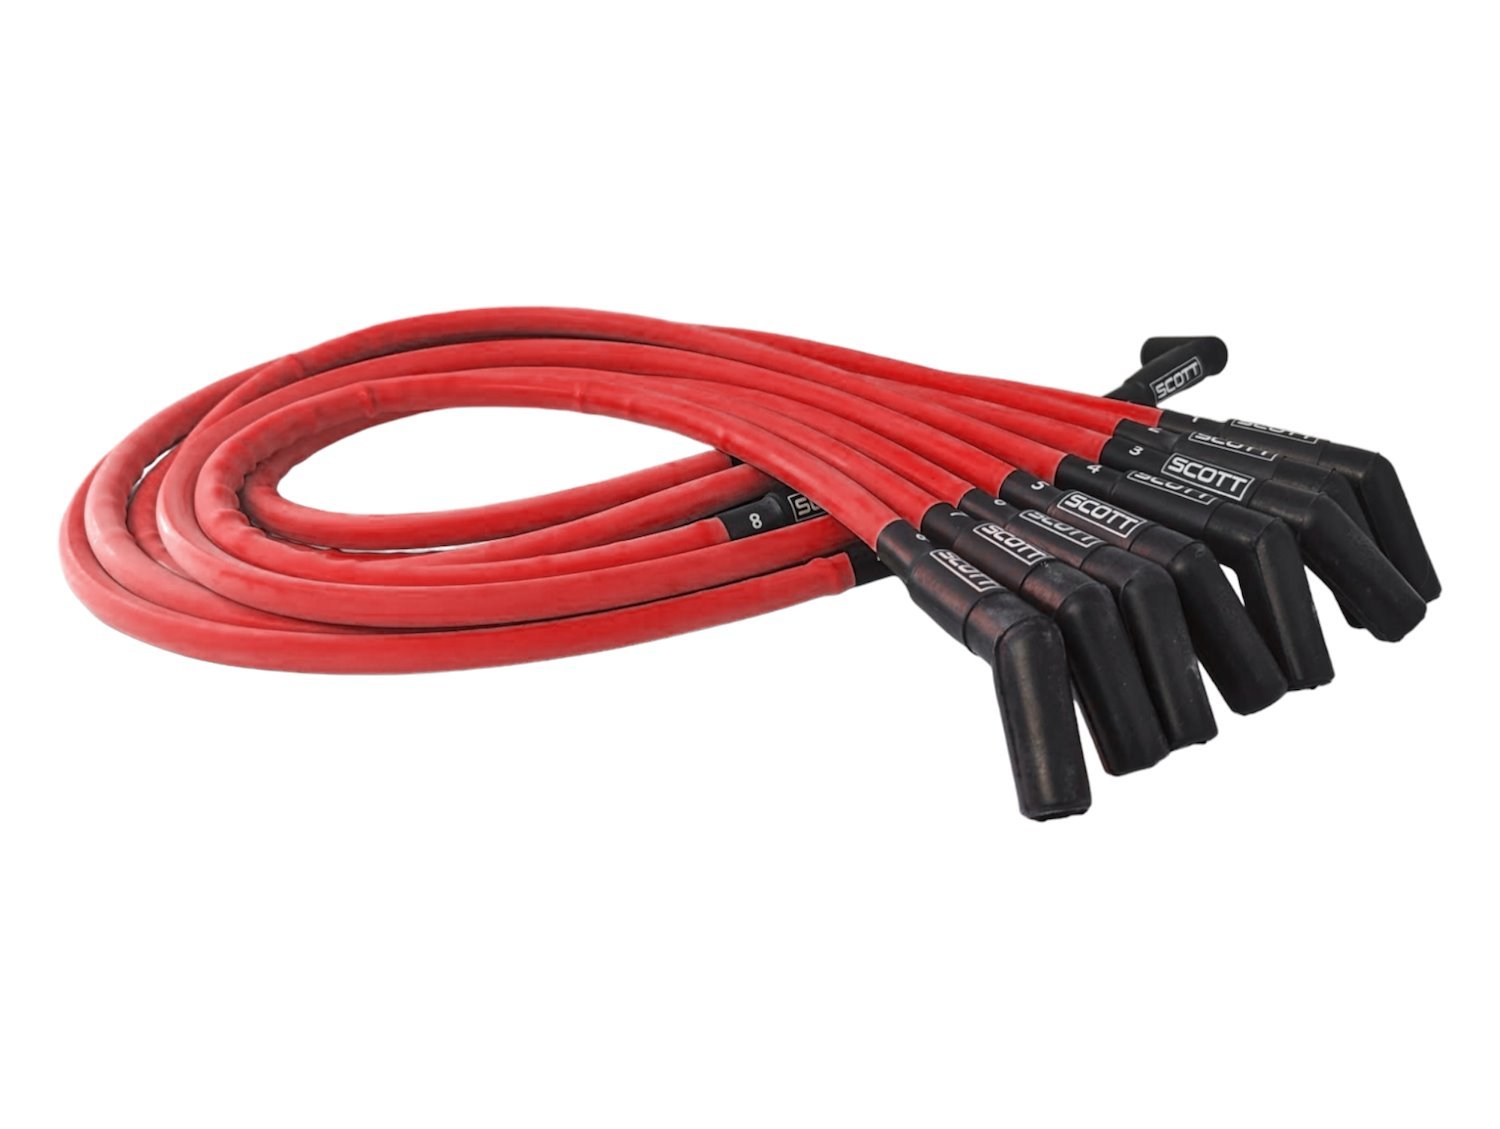 SPW-CH-426-2 High-Performance Silicone-Sleeved Spark Plug Wire Set for Small Block Ford, Over Valve Cover [Red]